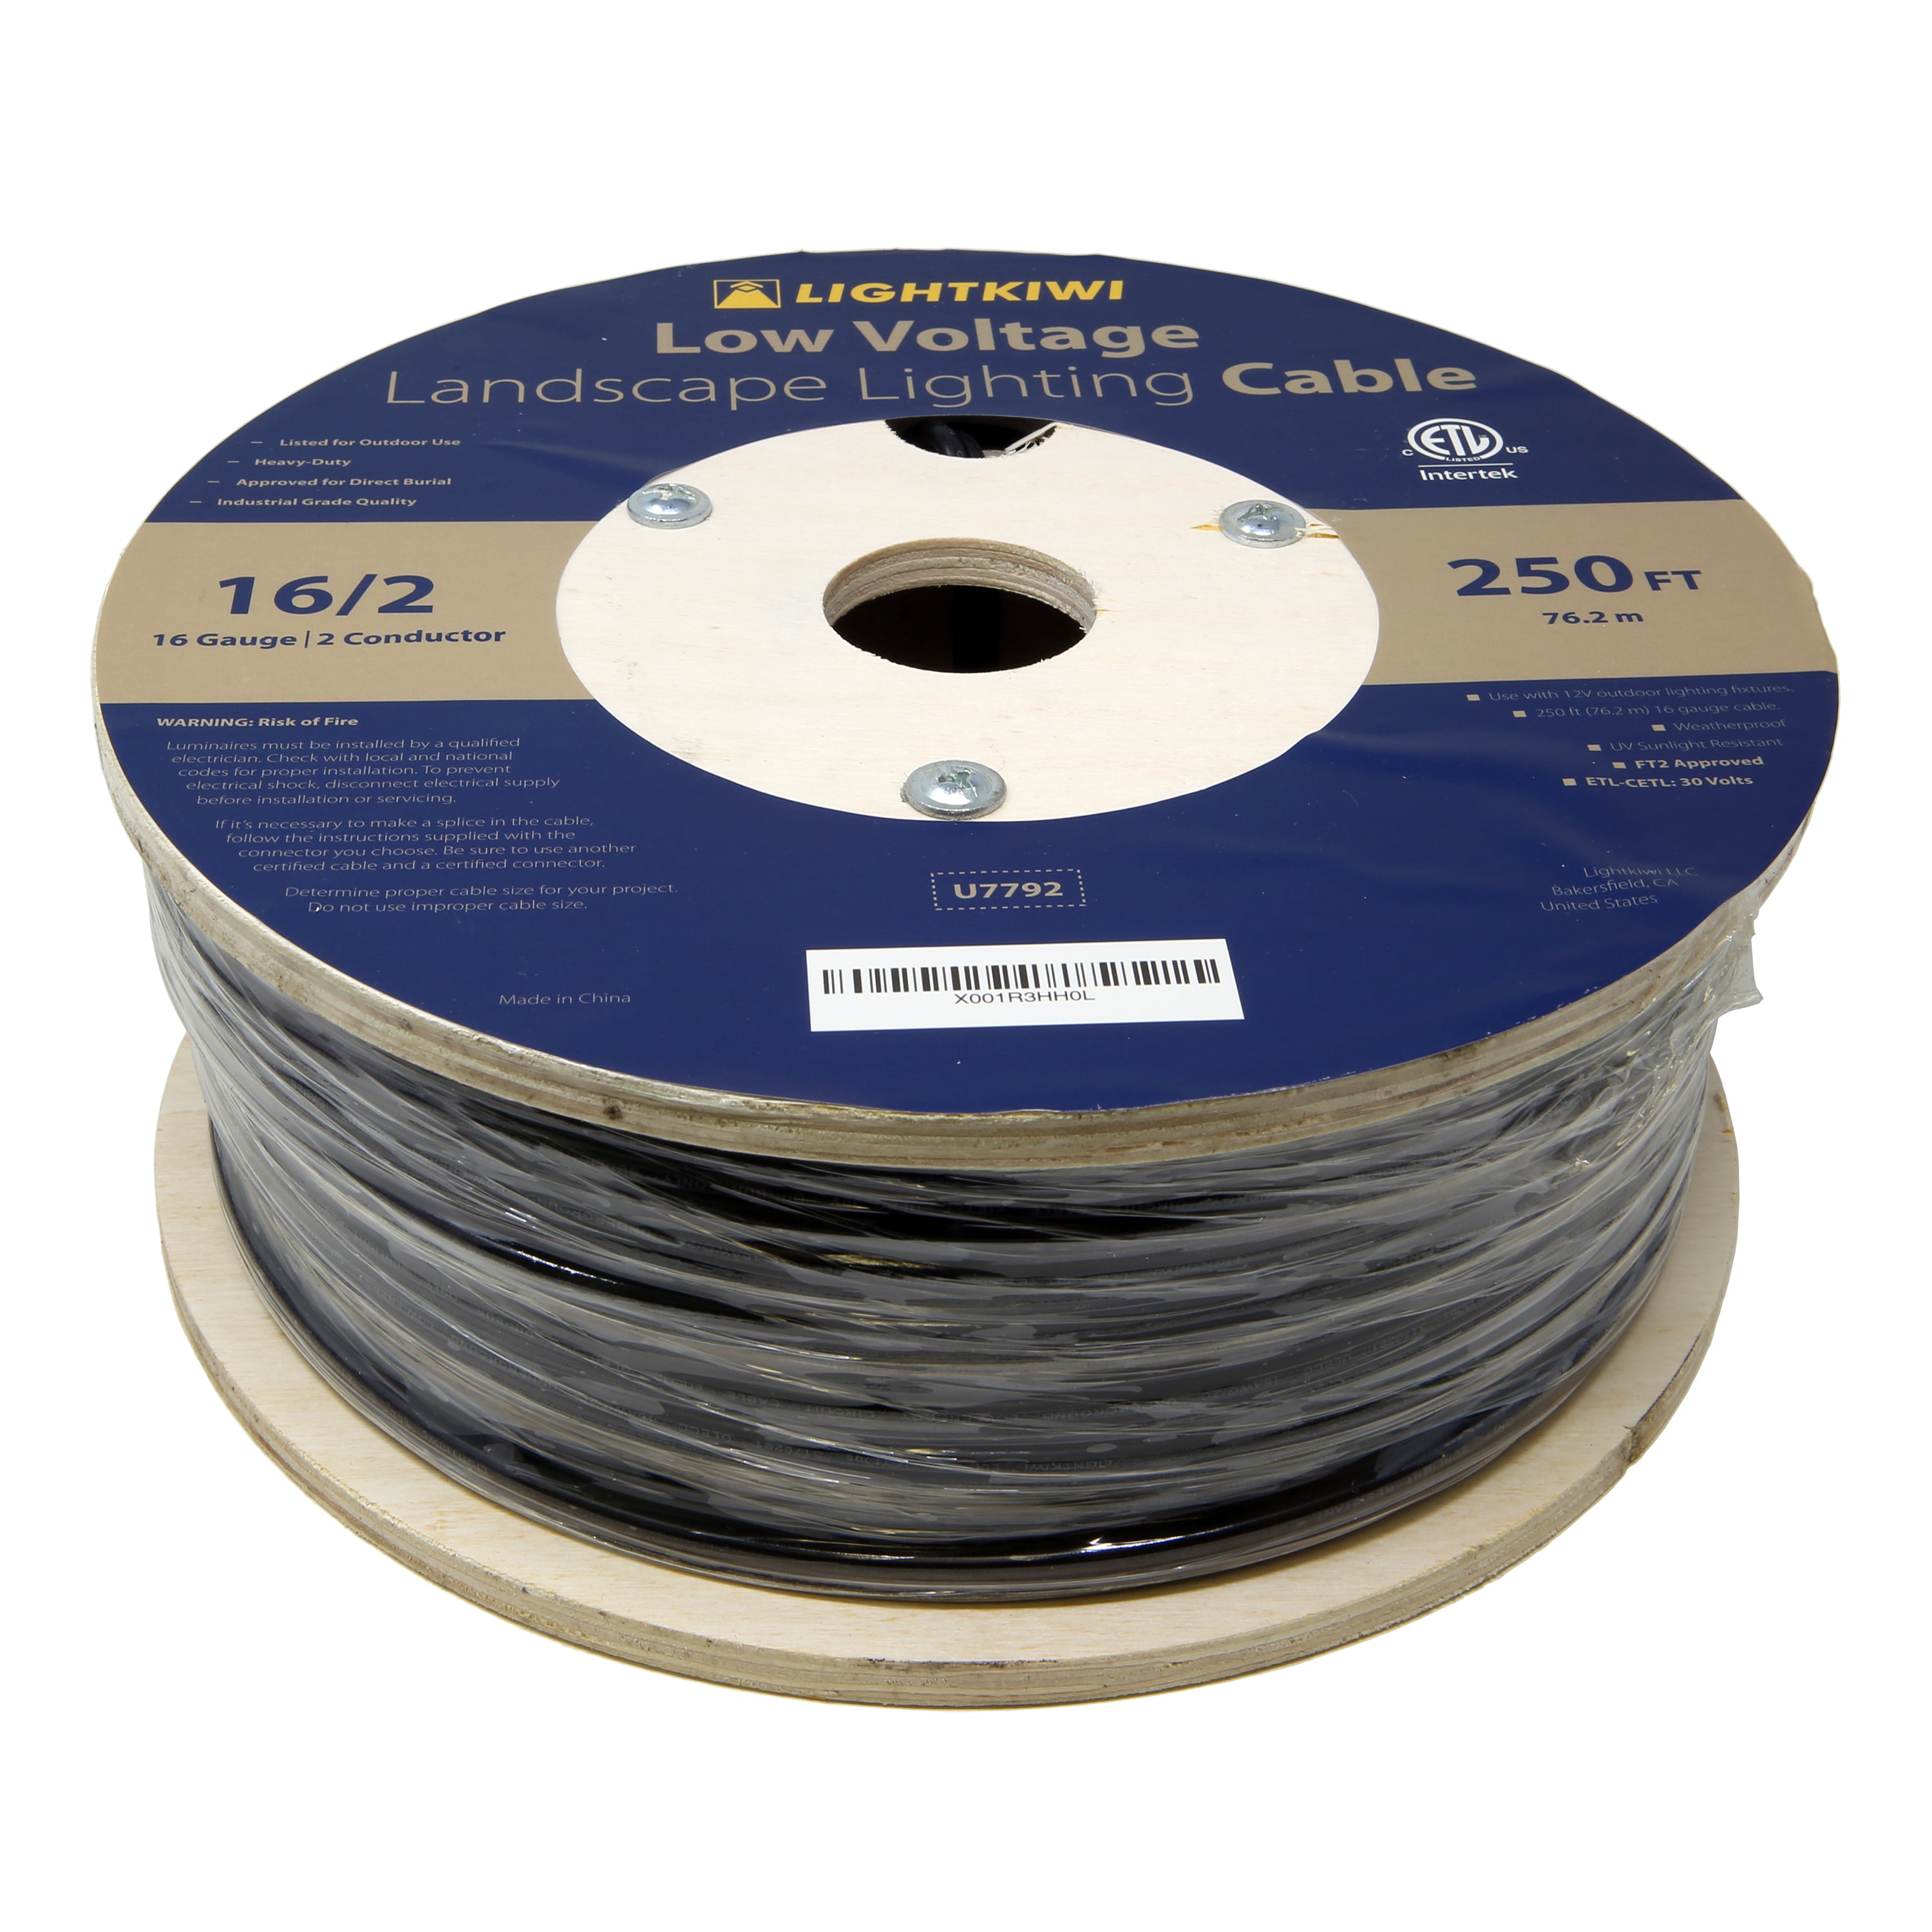 16AWG 2-Conductor Direct Burial Wire for Low Voltage Landscape Lighting, 250ft